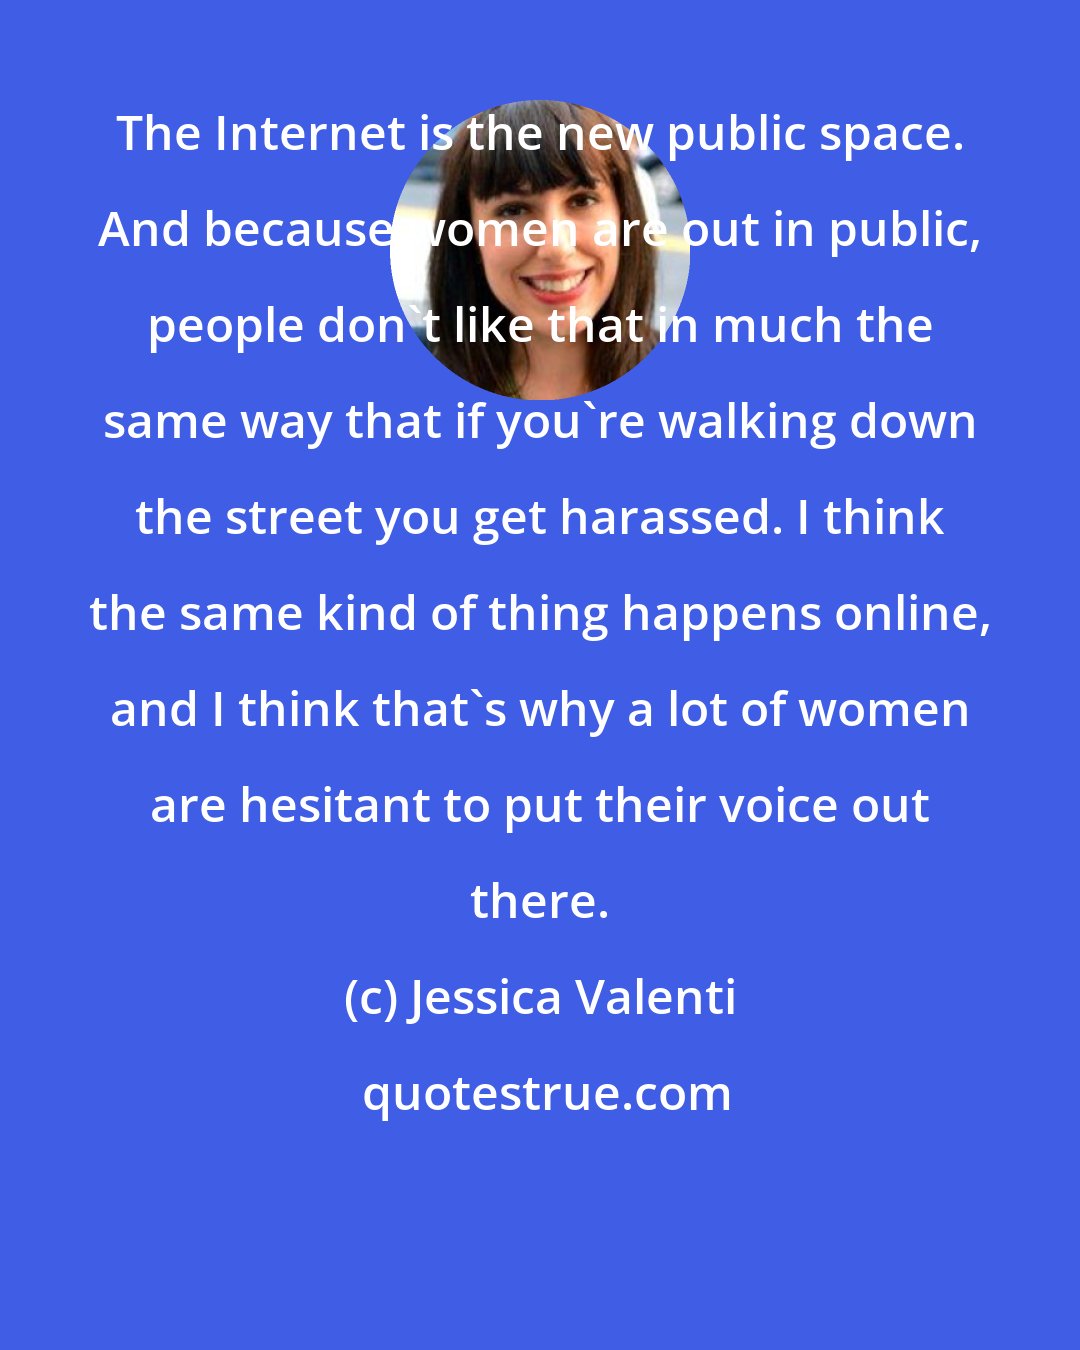 Jessica Valenti: The Internet is the new public space. And because women are out in public, people don't like that in much the same way that if you're walking down the street you get harassed. I think the same kind of thing happens online, and I think that's why a lot of women are hesitant to put their voice out there.